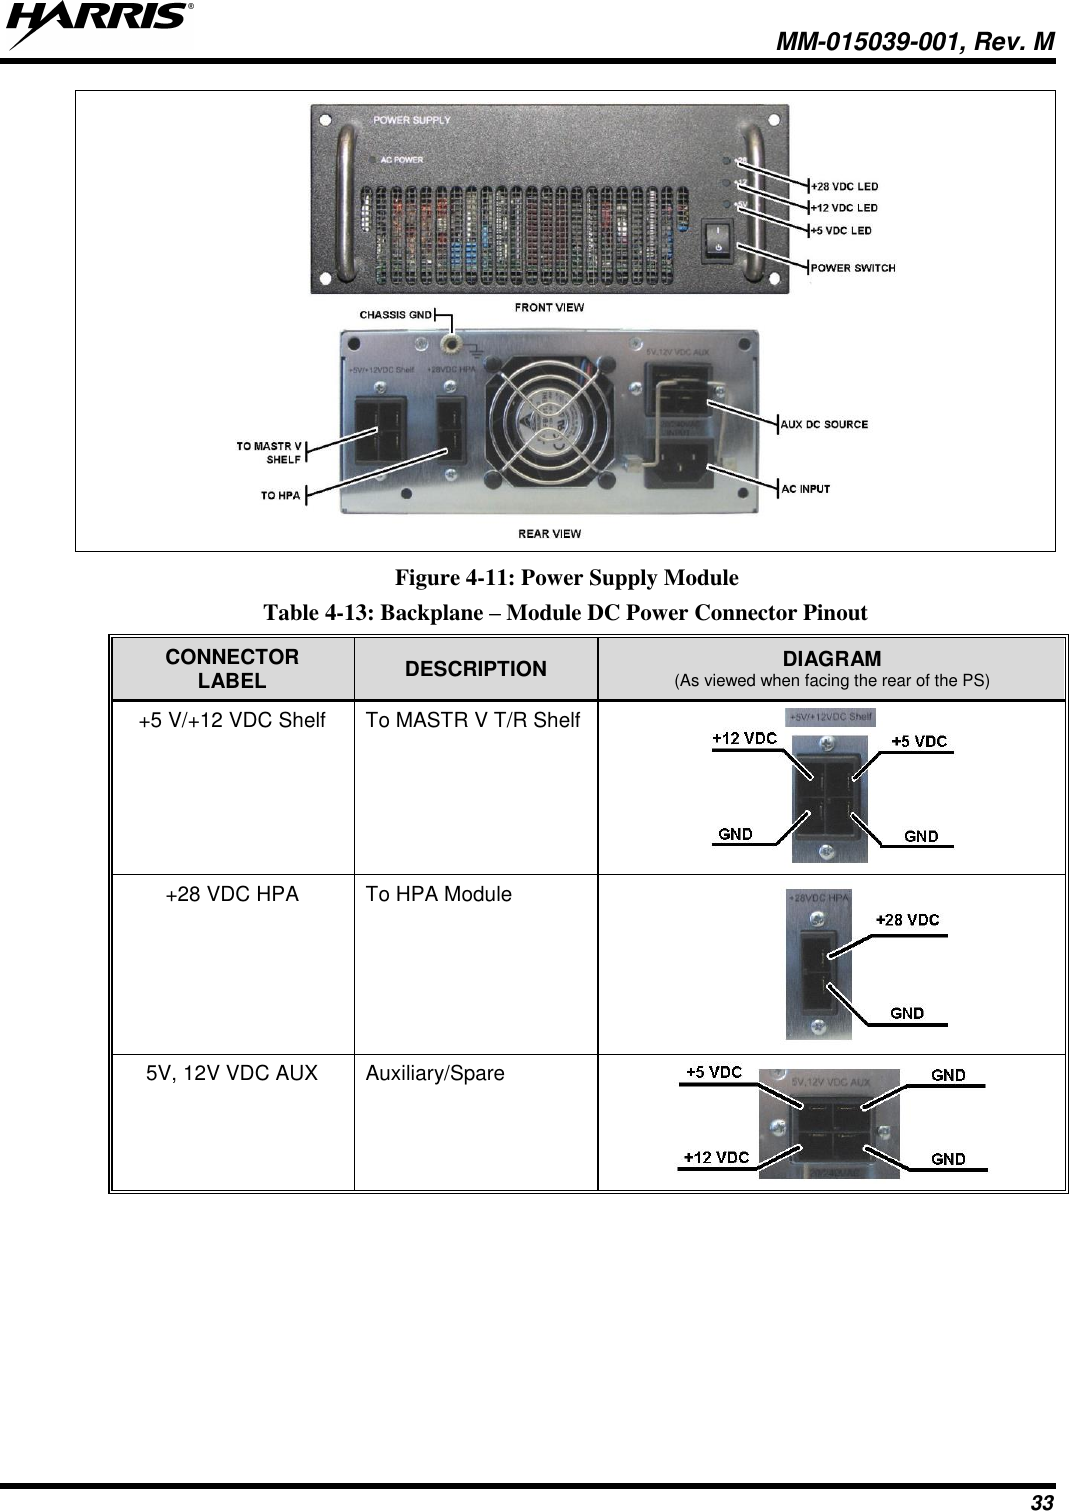   MM-015039-001, Rev. M 33  Figure 4-11: Power Supply Module Table 4-13: Backplane – Module DC Power Connector Pinout CONNECTOR LABEL DESCRIPTION DIAGRAM (As viewed when facing the rear of the PS) +5 V/+12 VDC Shelf To MASTR V T/R Shelf  +28 VDC HPA To HPA Module                                5V, 12V VDC AUX Auxiliary/Spare   